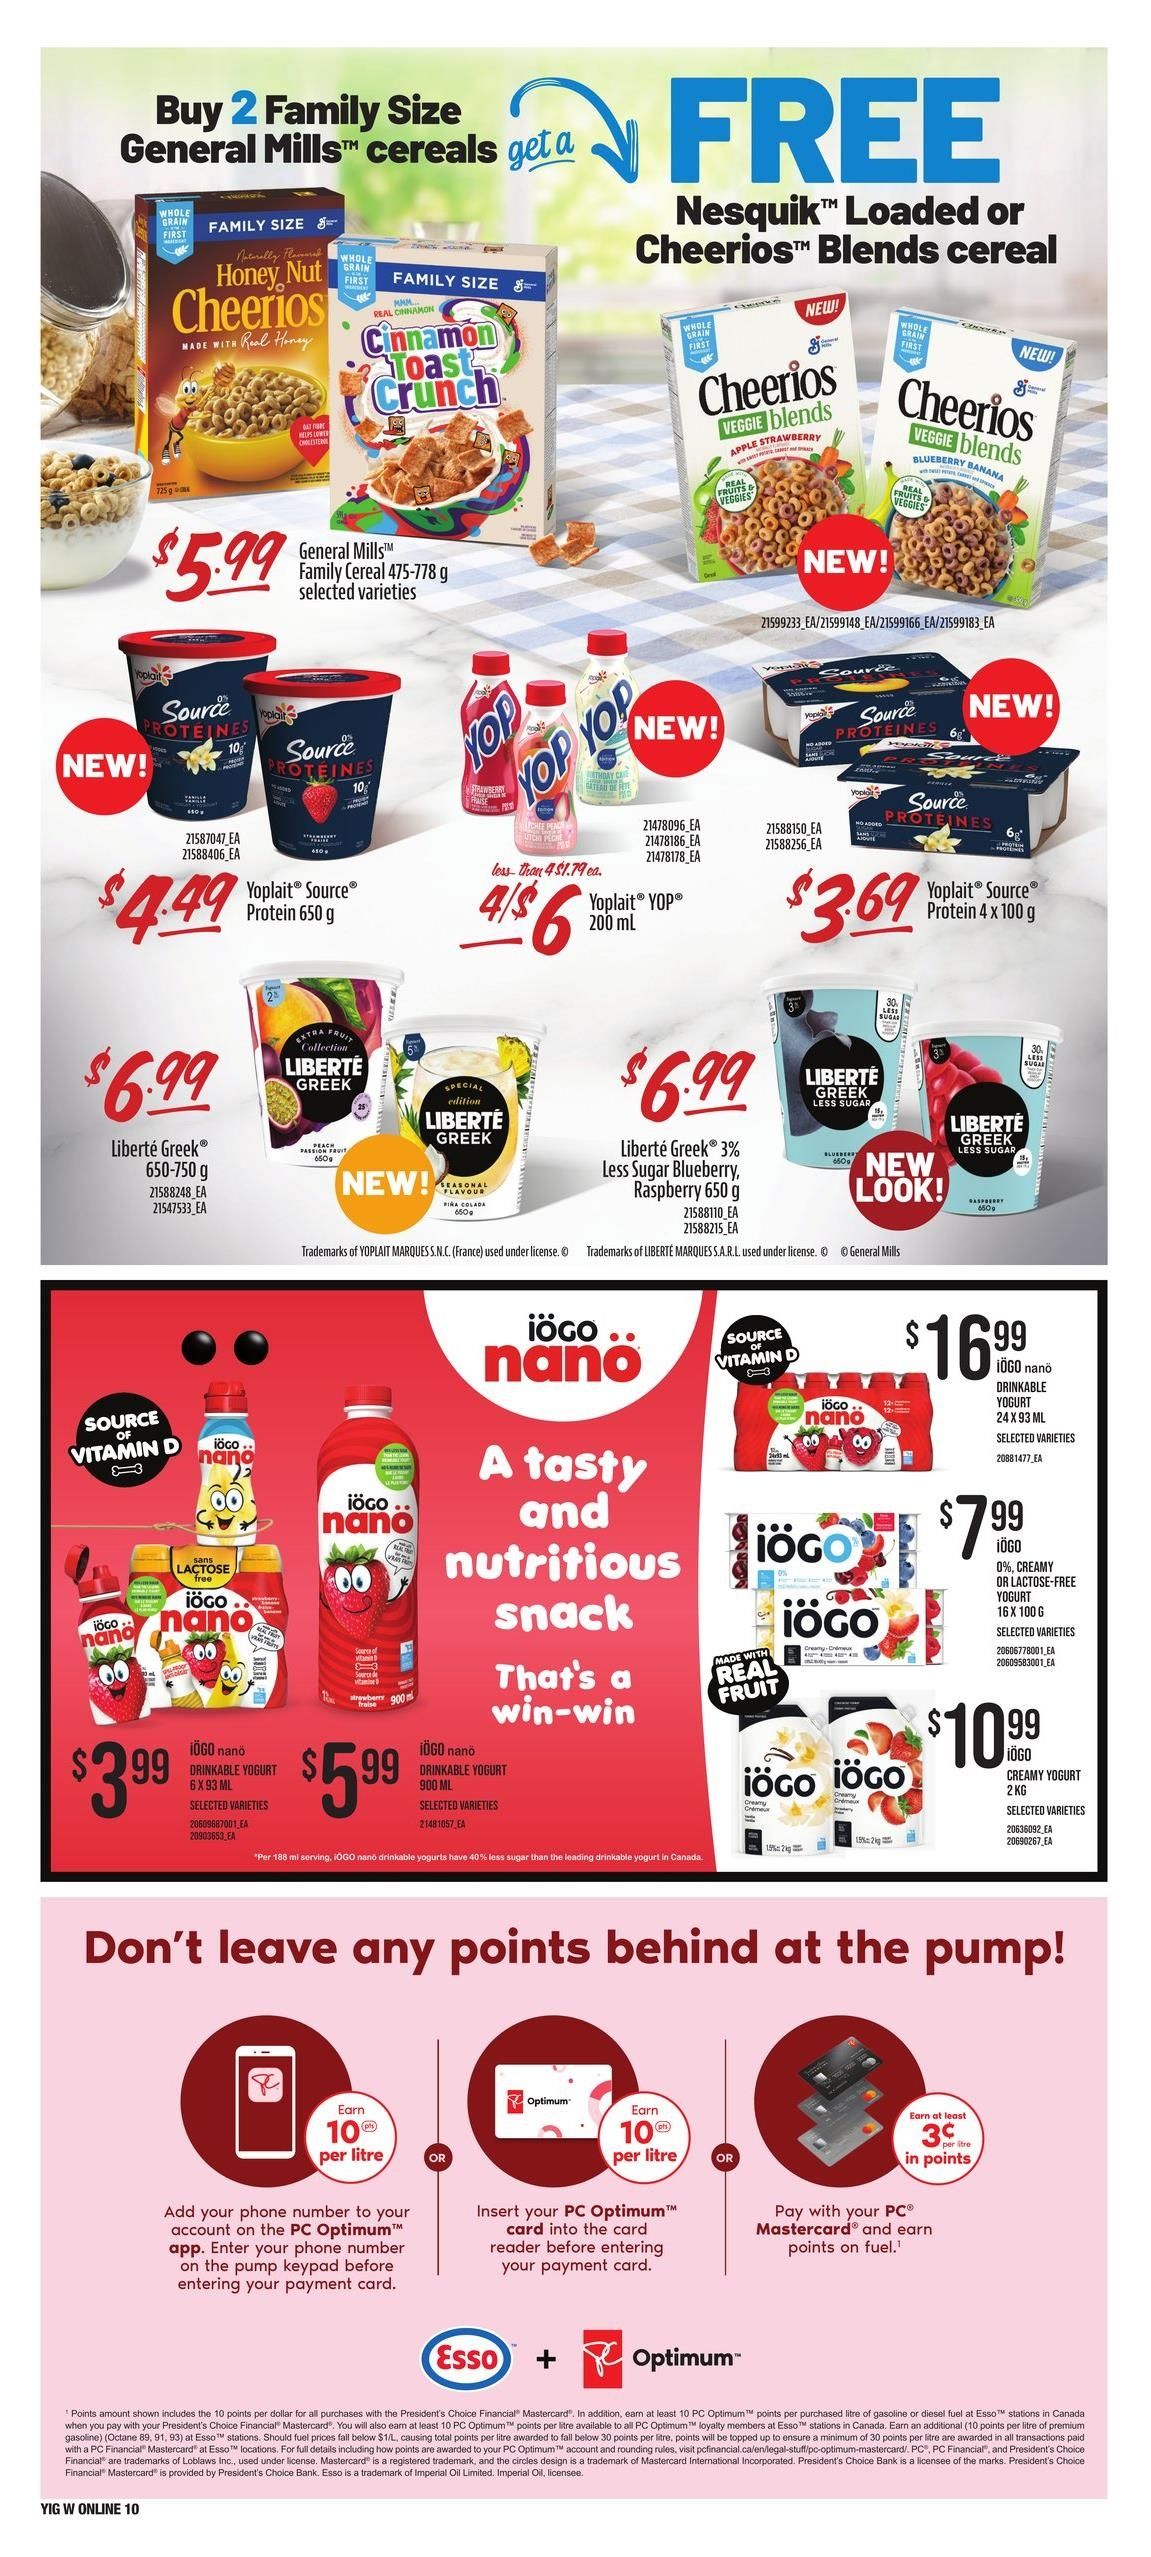 Independent - Western Canada - Weekly Flyer Specials - Page 15